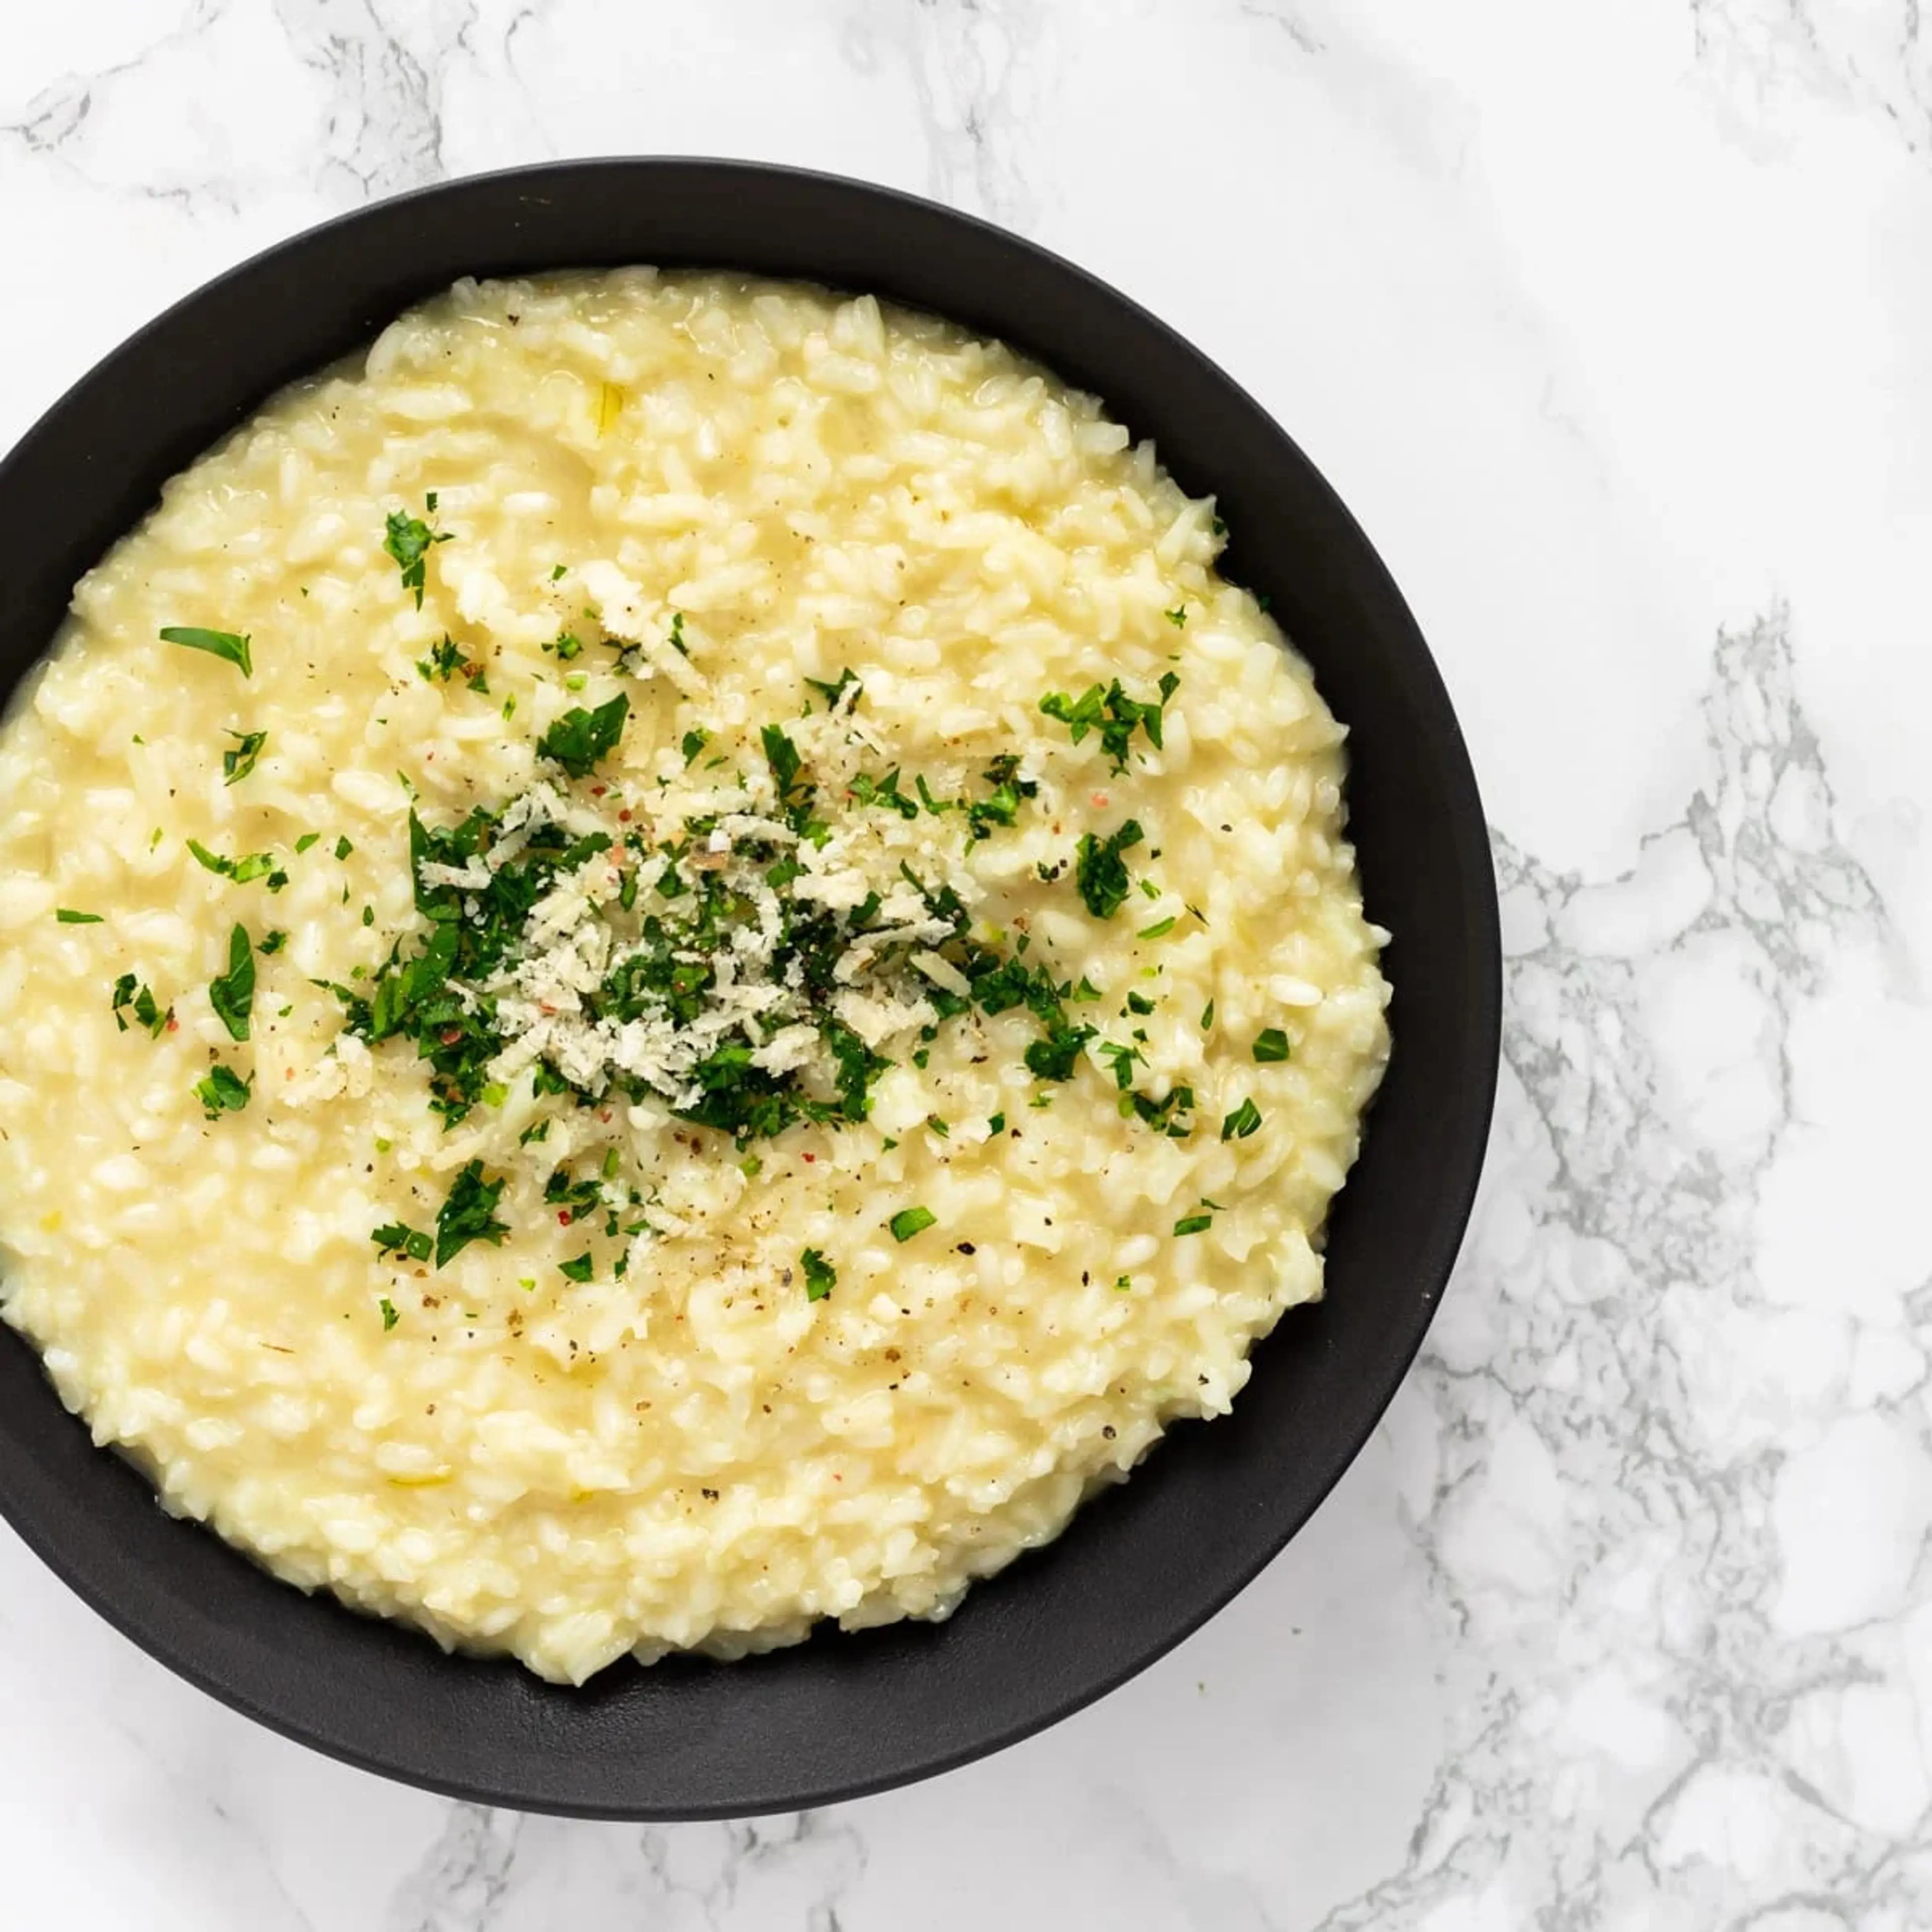 Whirlwind Parmesan Risotto